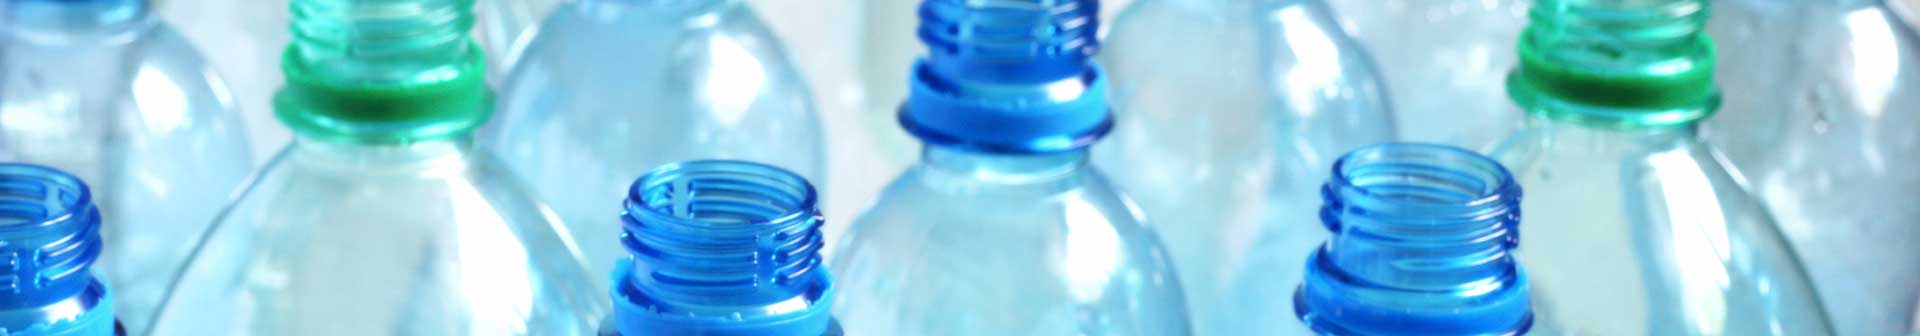 a photo of empty plastic bottles close up